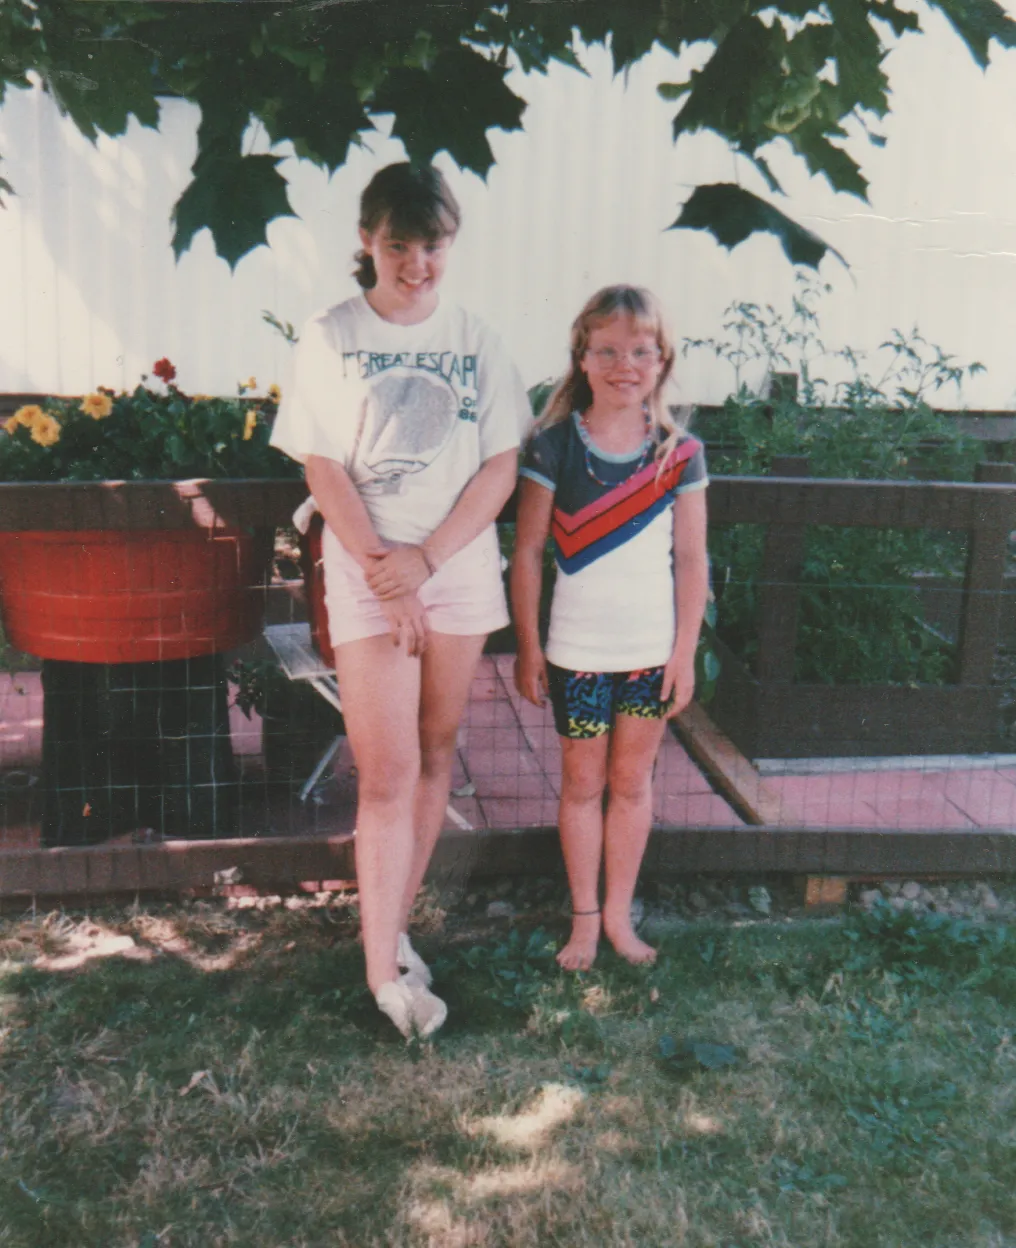 1987 maybe - Katie, tall female friend.png